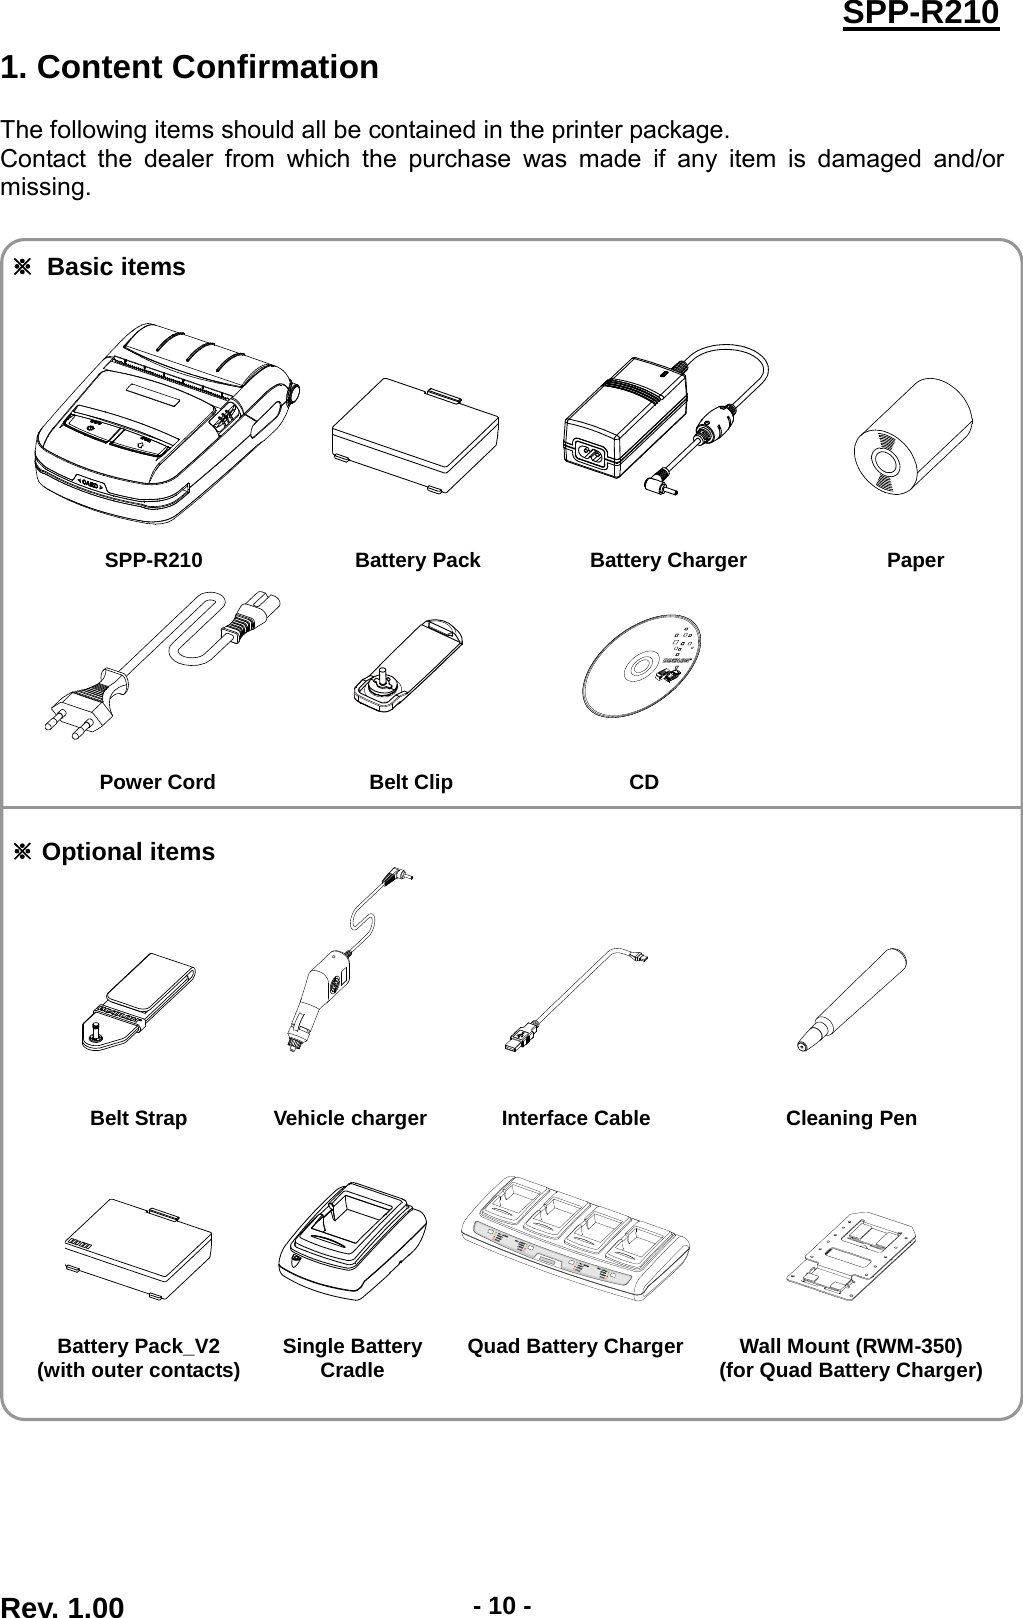  SPP-R210 1. Content Confirmation  The following items should all be contained in the printer package. Contact the dealer from which the purchase was made if any item is damaged and/or missing.   ※ Basic items           SPP-R210 Battery Pack Battery Charger Paper             Power Cord  Belt Clip    CD    ※ Optional items         Belt Strap  Vehicle charger  Interface Cable  Cleaning Pen            Battery Pack_V2 (with outer contacts) Single Battery Cradle Quad Battery Charger  Wall Mount (RWM-350) (for Quad Battery Charger)         Rev. 1.00  - 10 - 